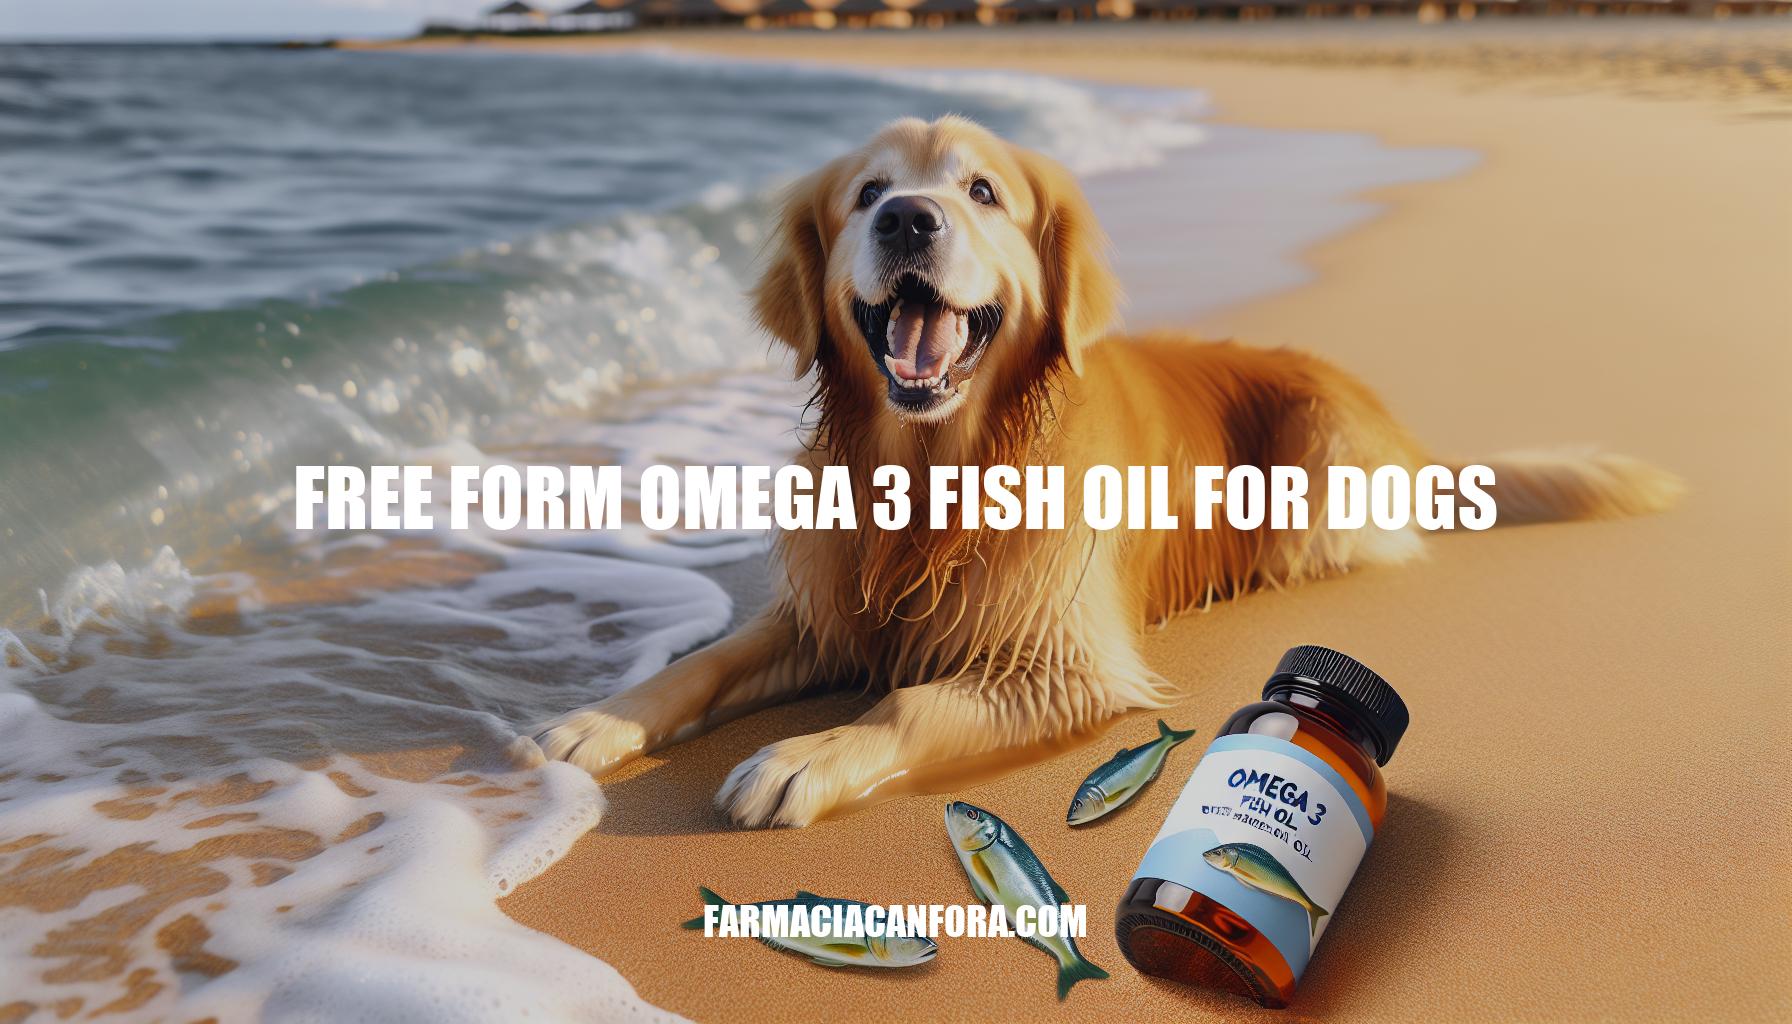 The Benefits of Free Form Omega 3 Fish Oil for Dogs